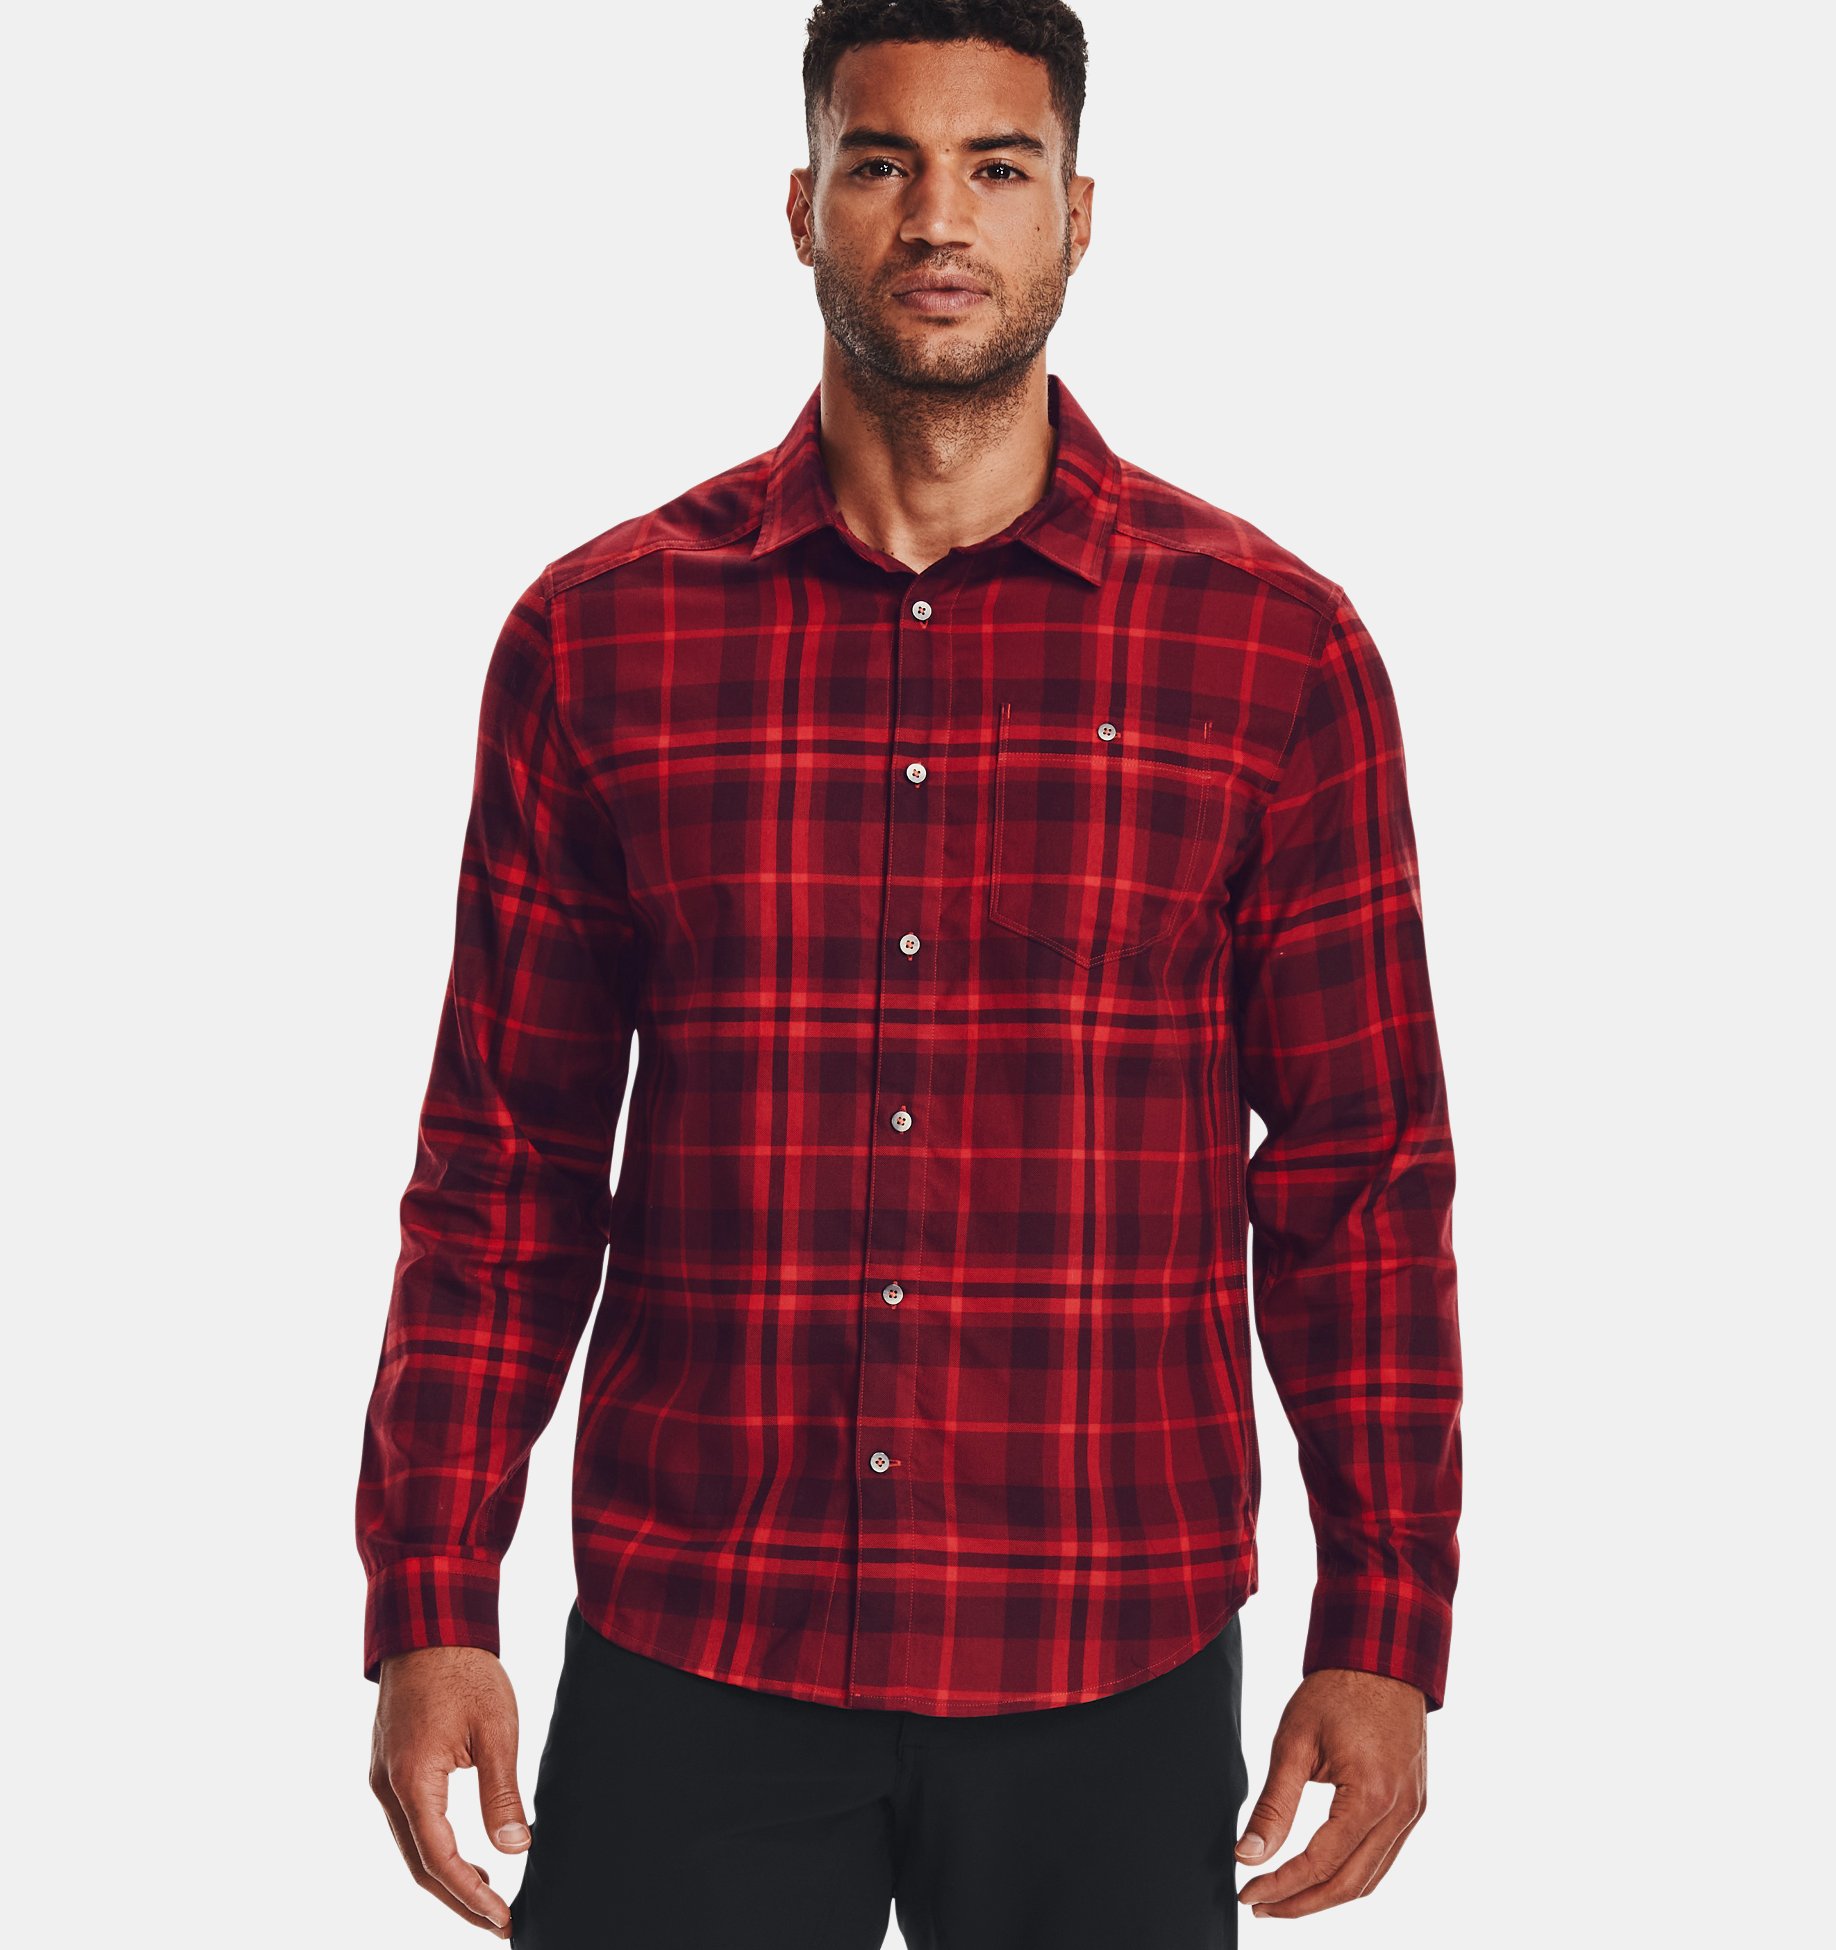 Under Armour 1345989688LG Tradesman Flannel 2.0 Red Large Botton Down Men's 